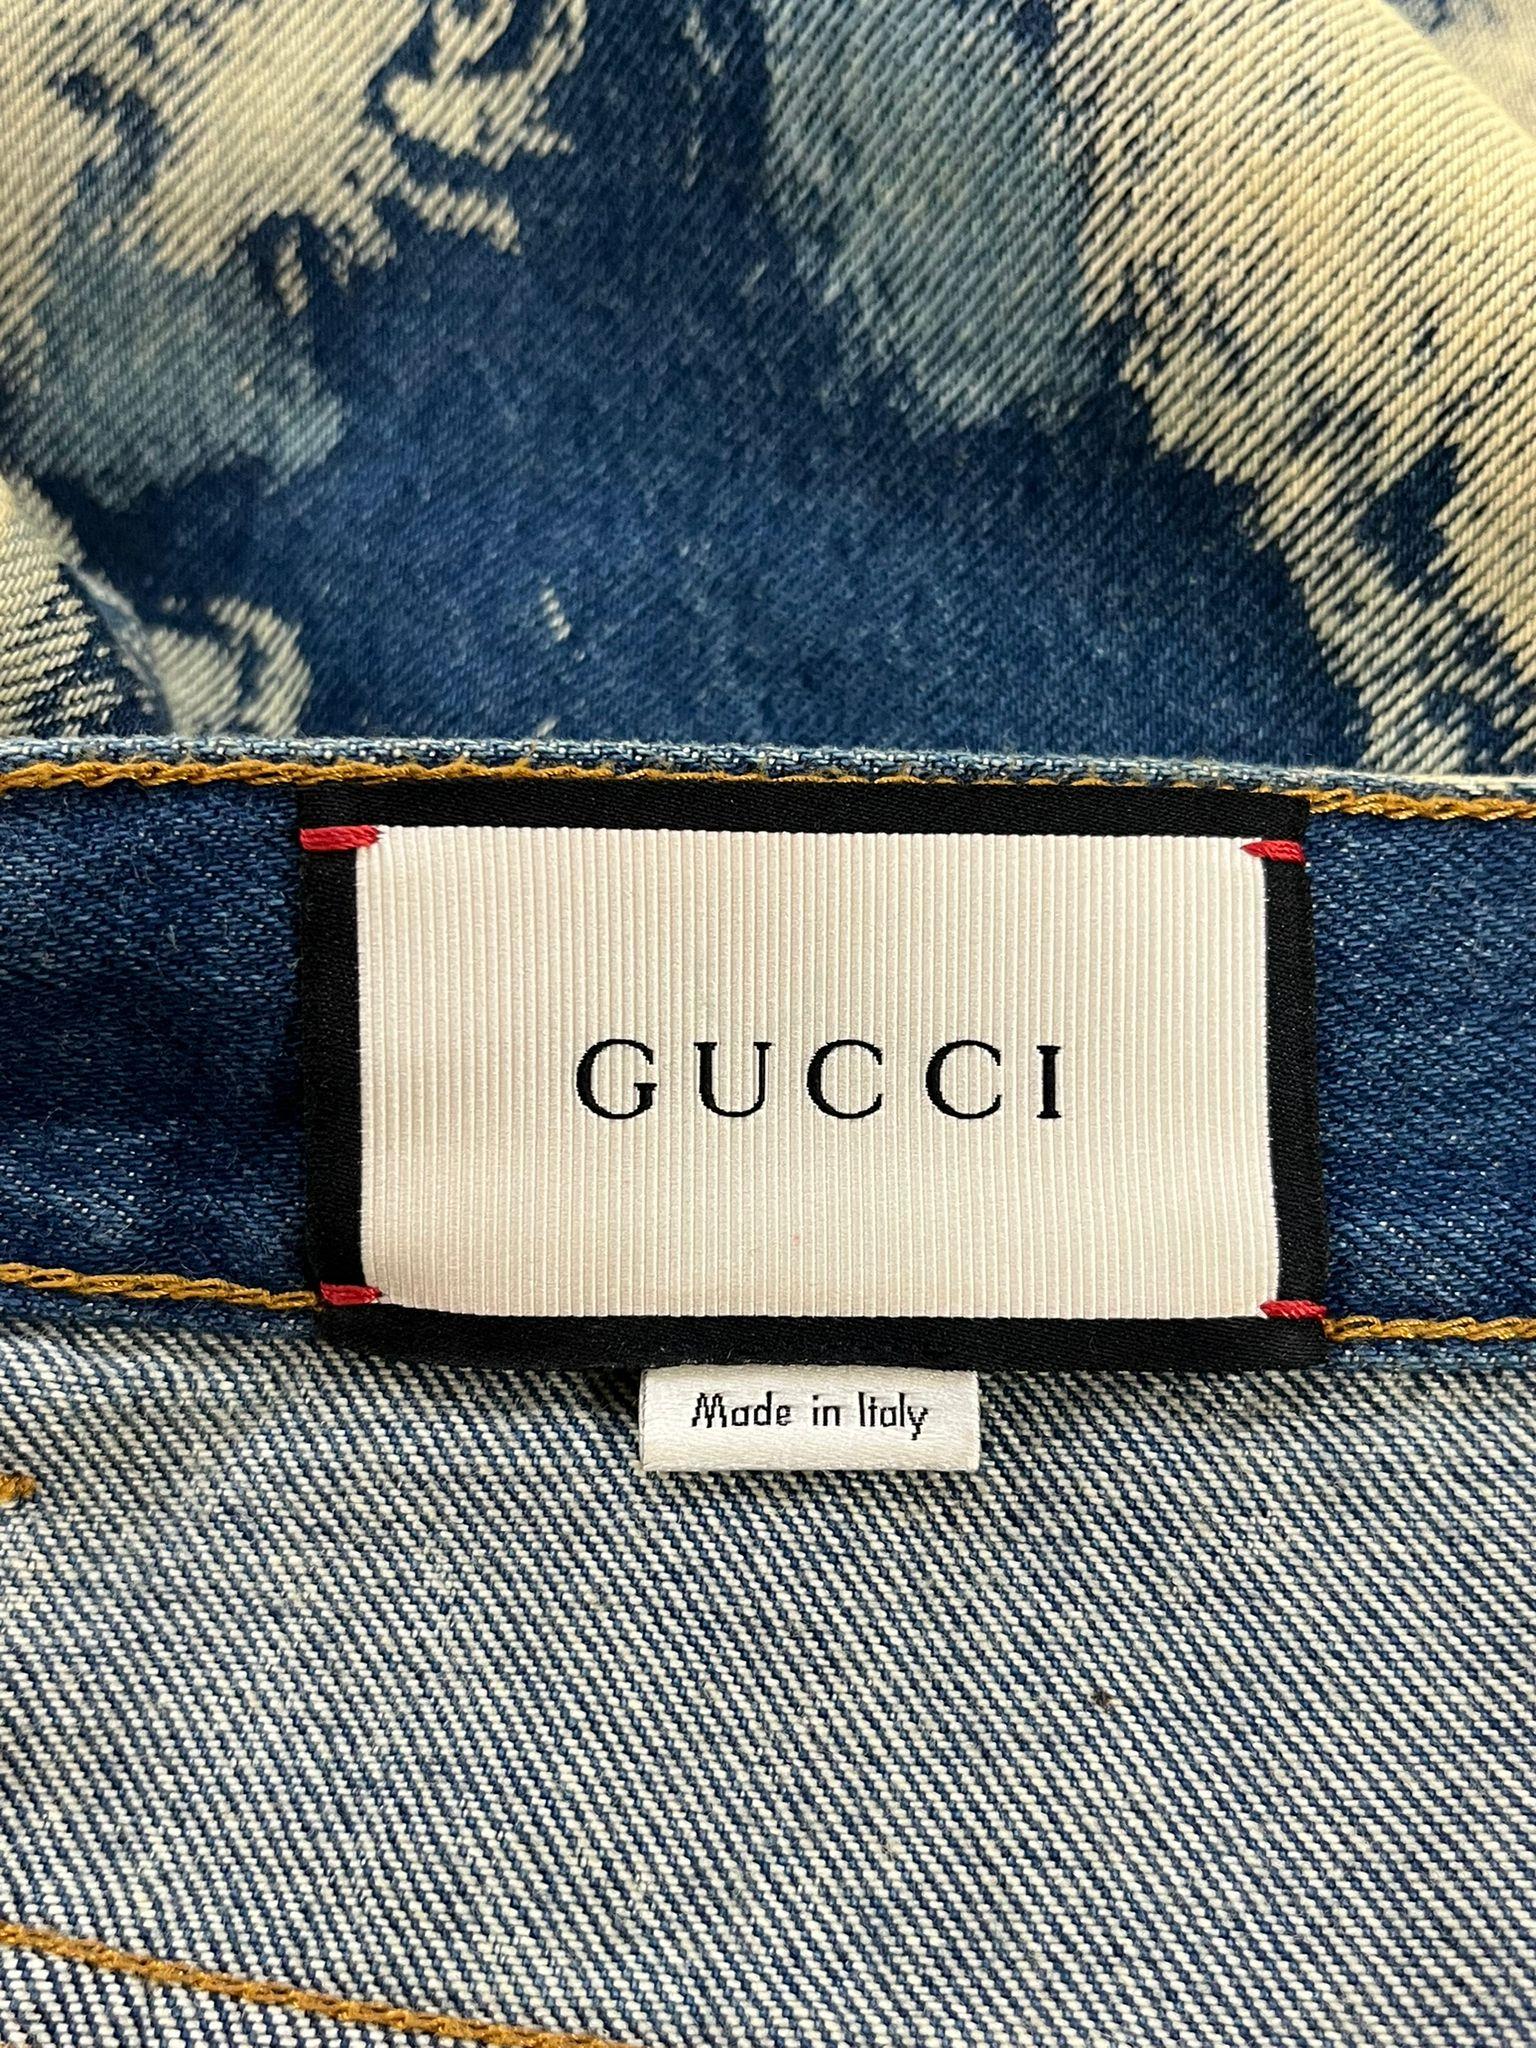 Gucci Denim Cotton Embroidered Skirt For Sale 2